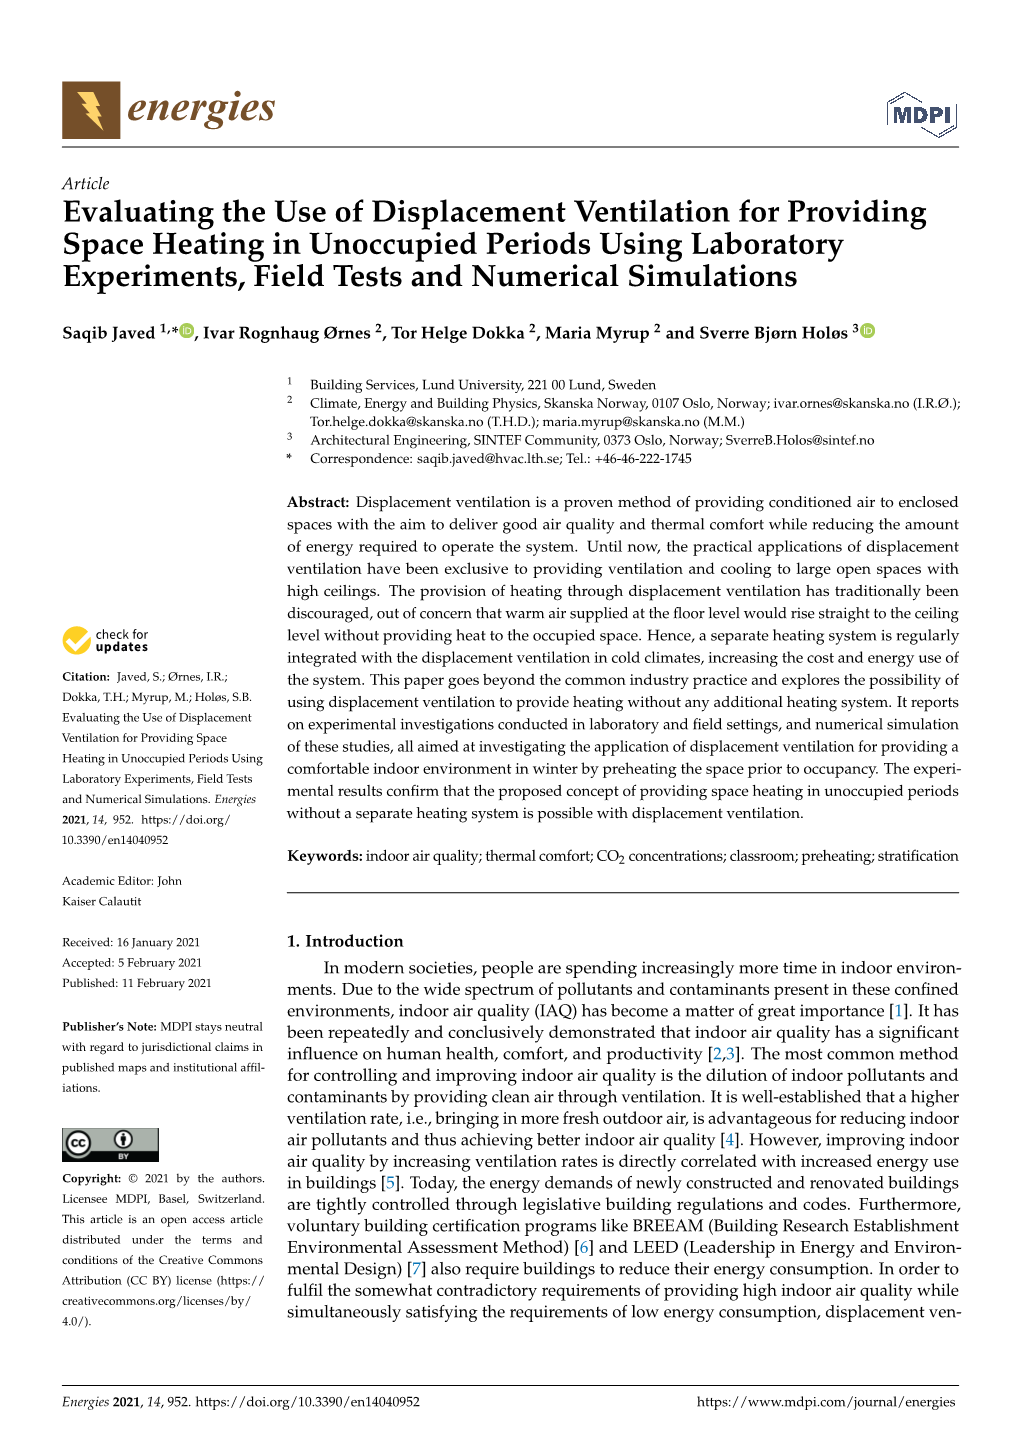 Evaluating the Use of Displacement Ventilation for Providing Space Heating in Unoccupied Periods Using Laboratory Experiments, Field Tests and Numerical Simulations